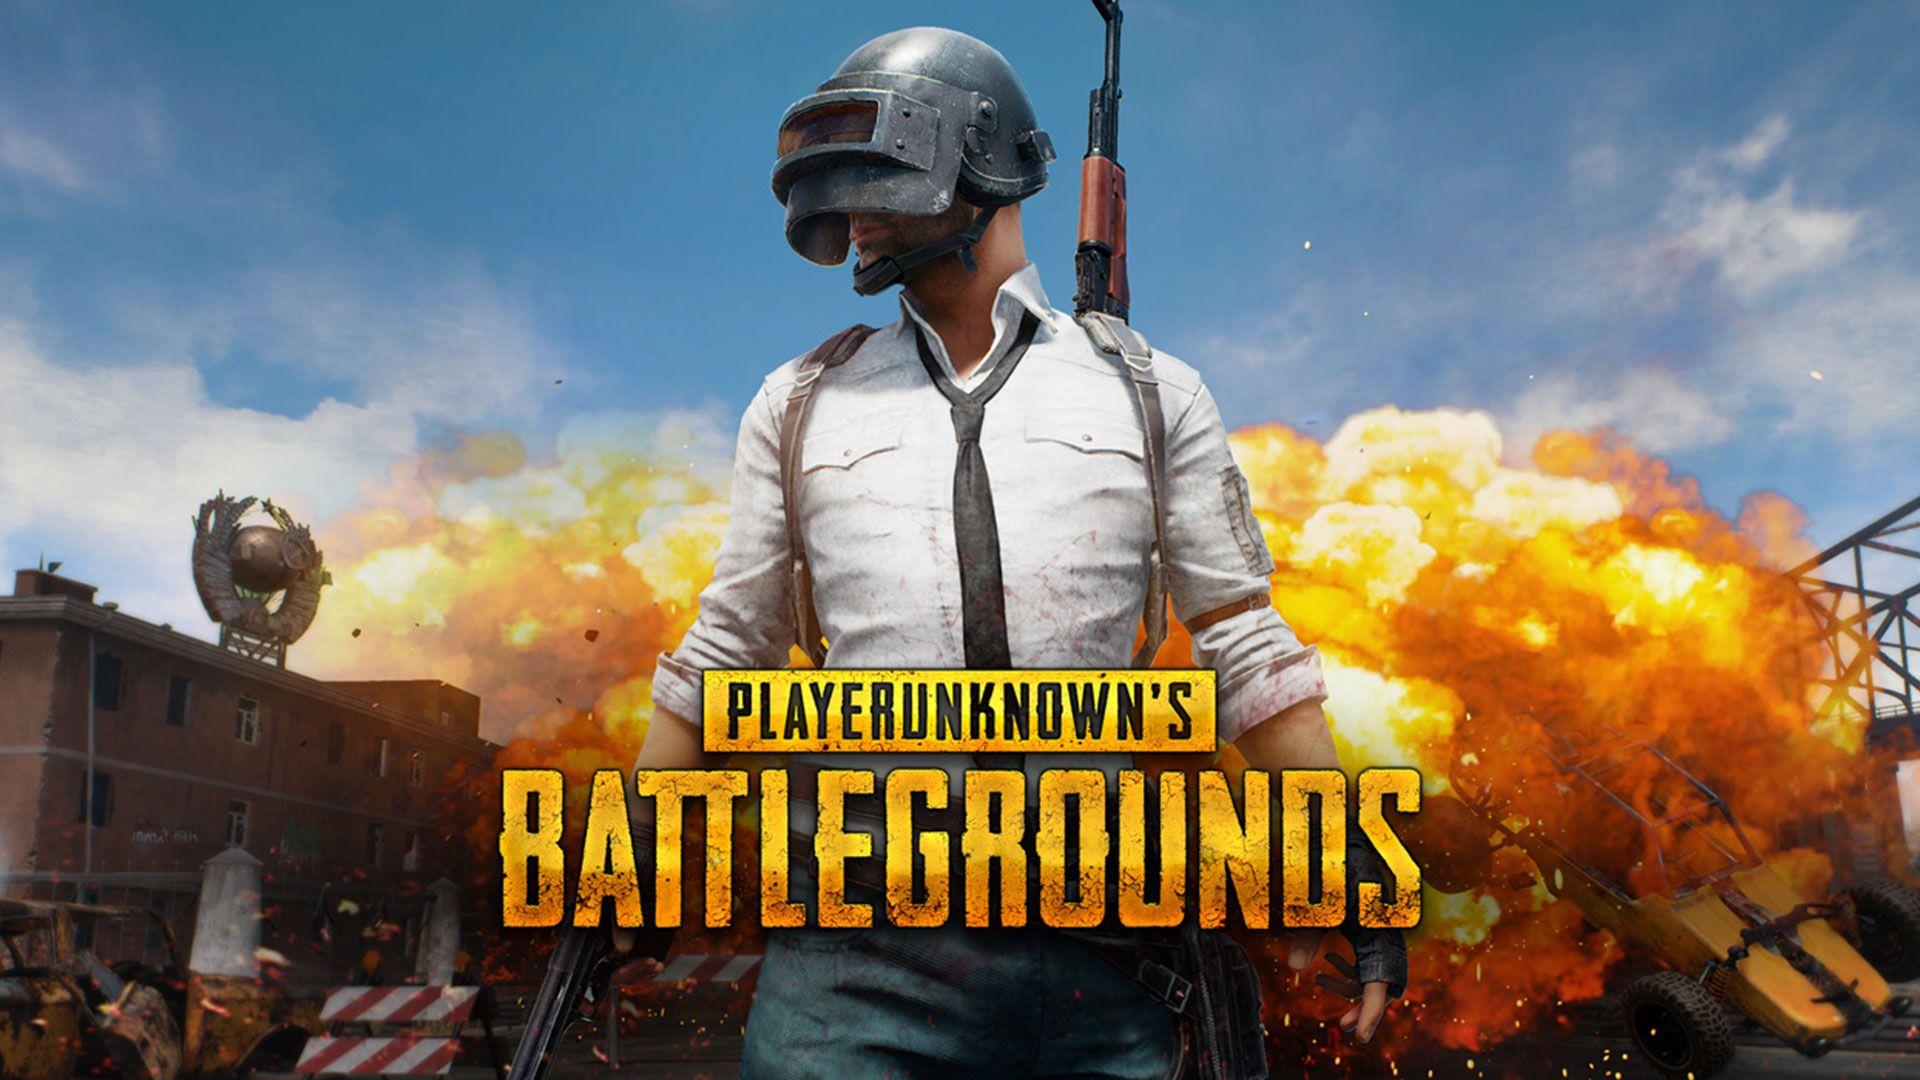 Pubg Wallpapers Full Hd On Wallpapers 1080p HD